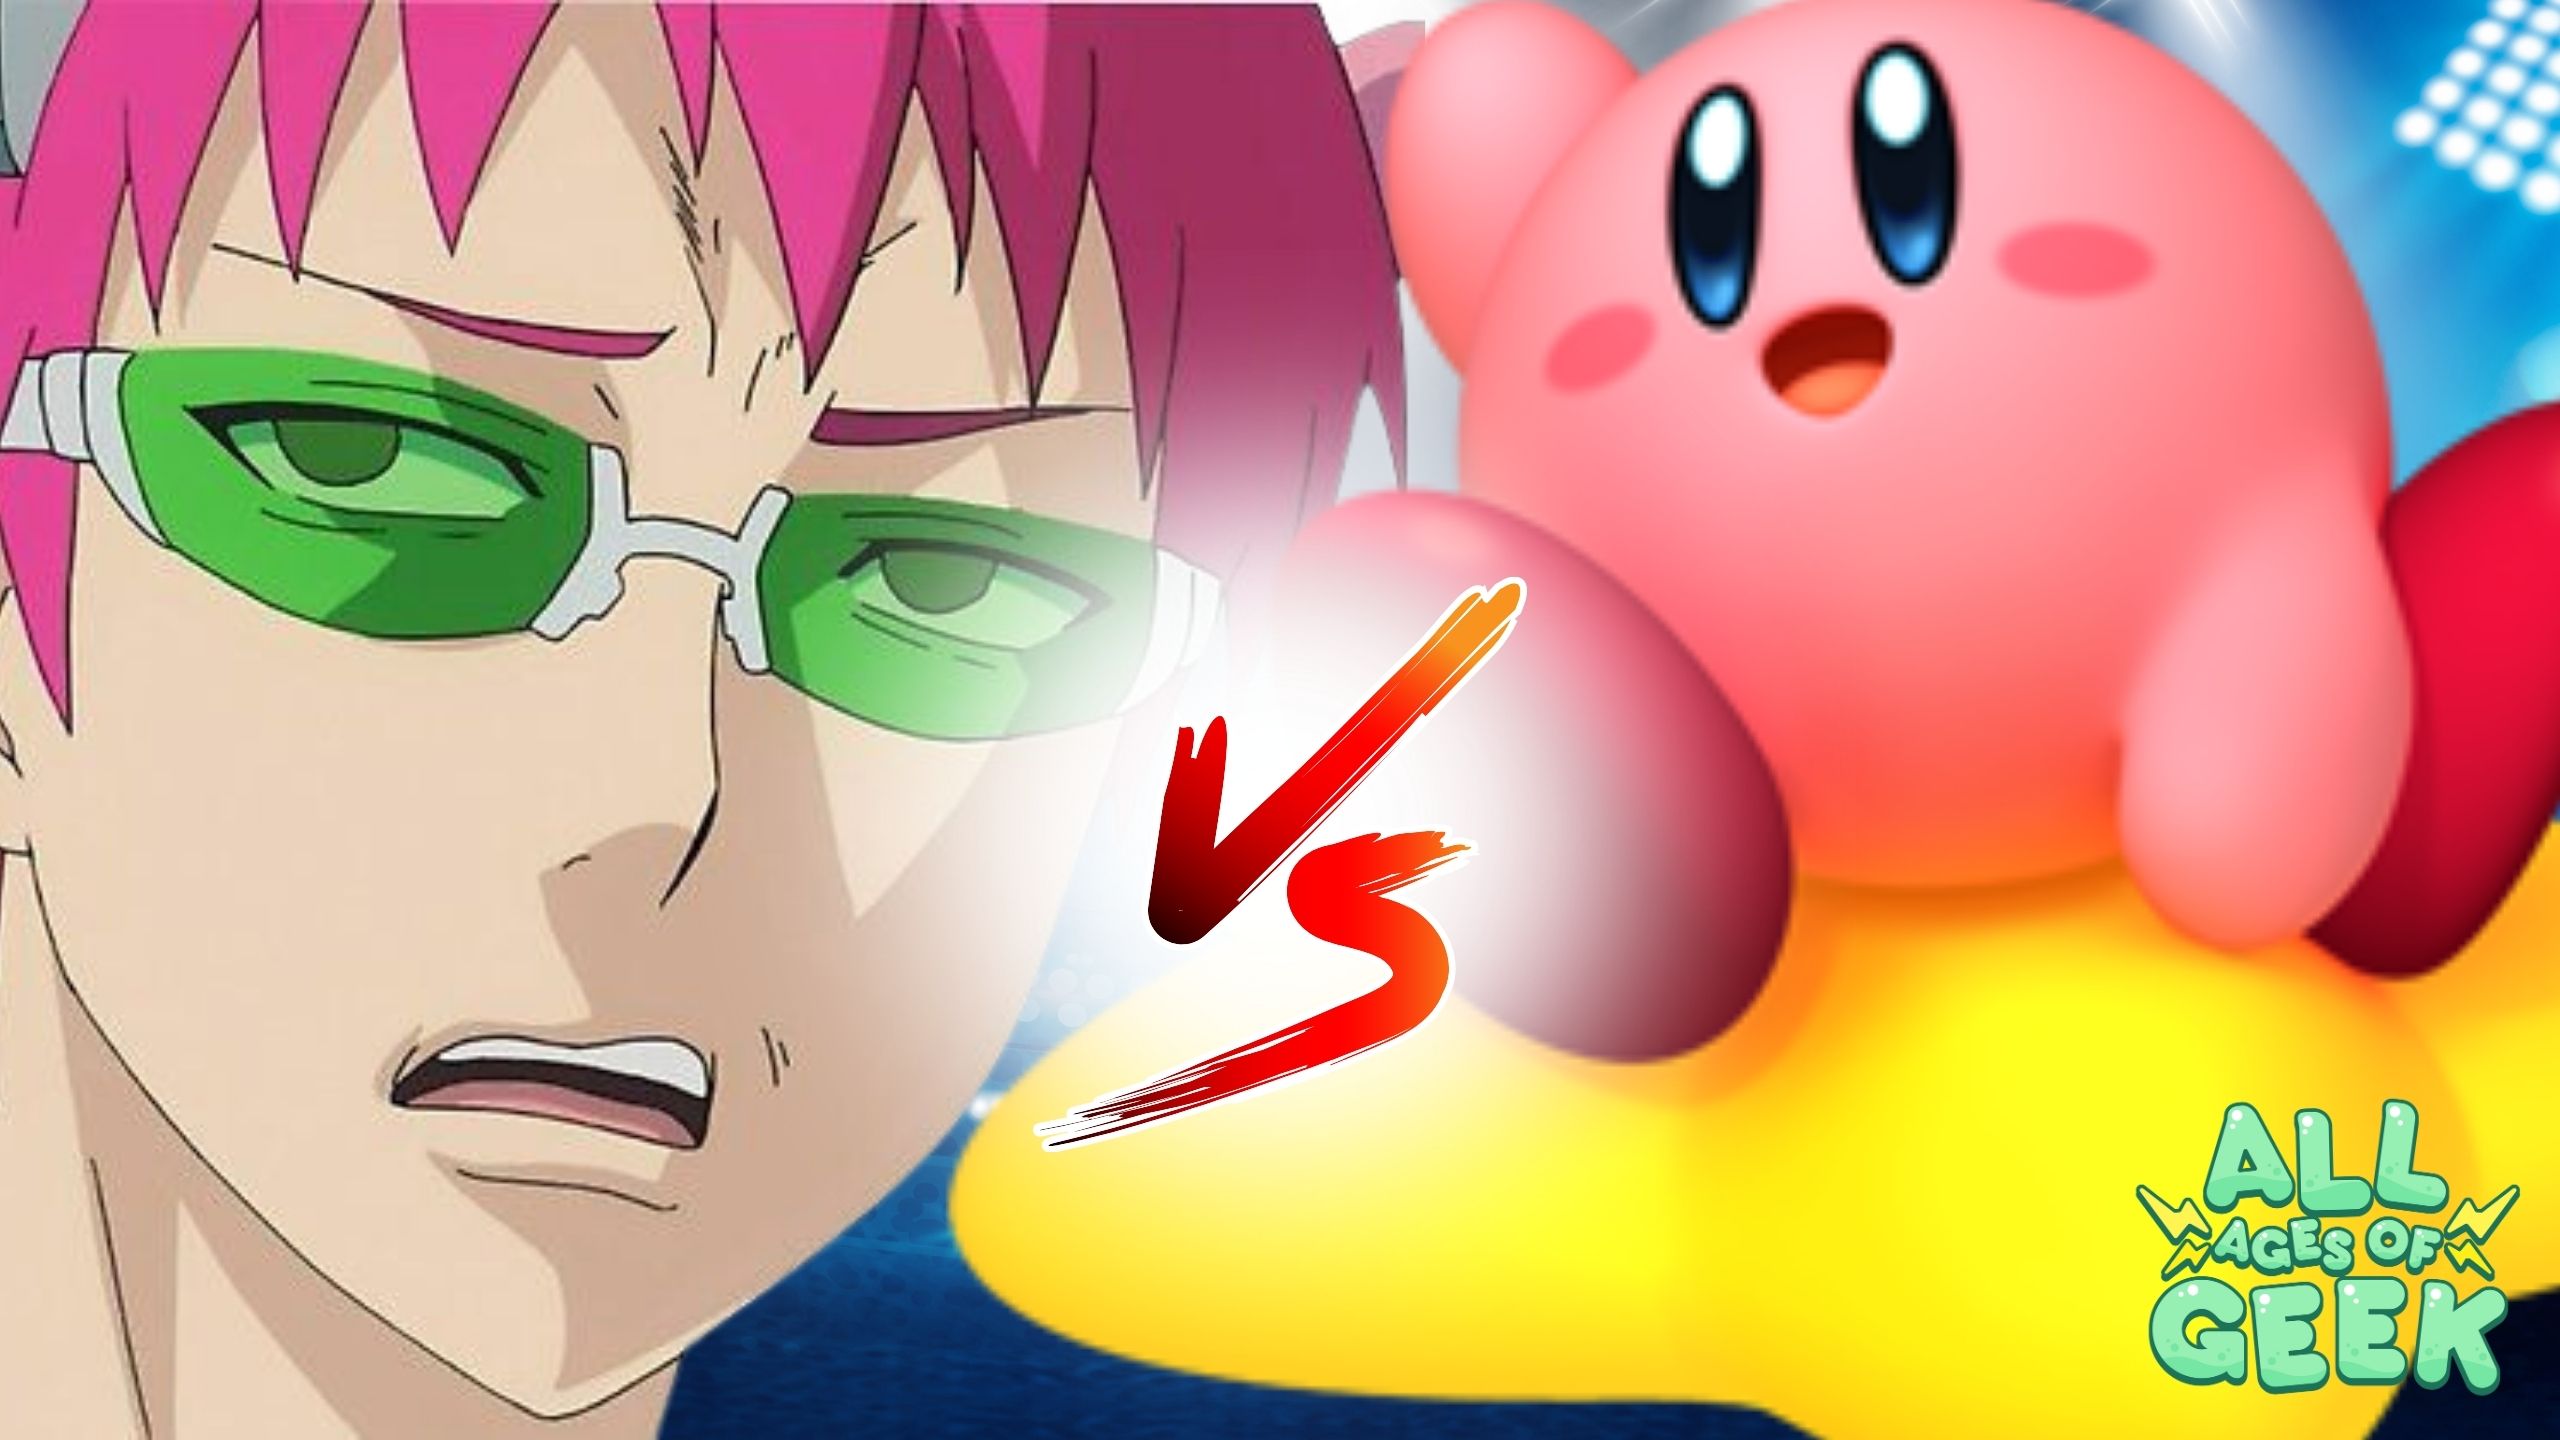 Kirby vs. Saiki K showdown image featuring Saiki K with his signature green-tinted glasses on the left and Kirby, the pink puffball, on the right. The 'VS' symbol is prominently displayed in the center. The All Ages of Geek logo is visible in the bottom right corner